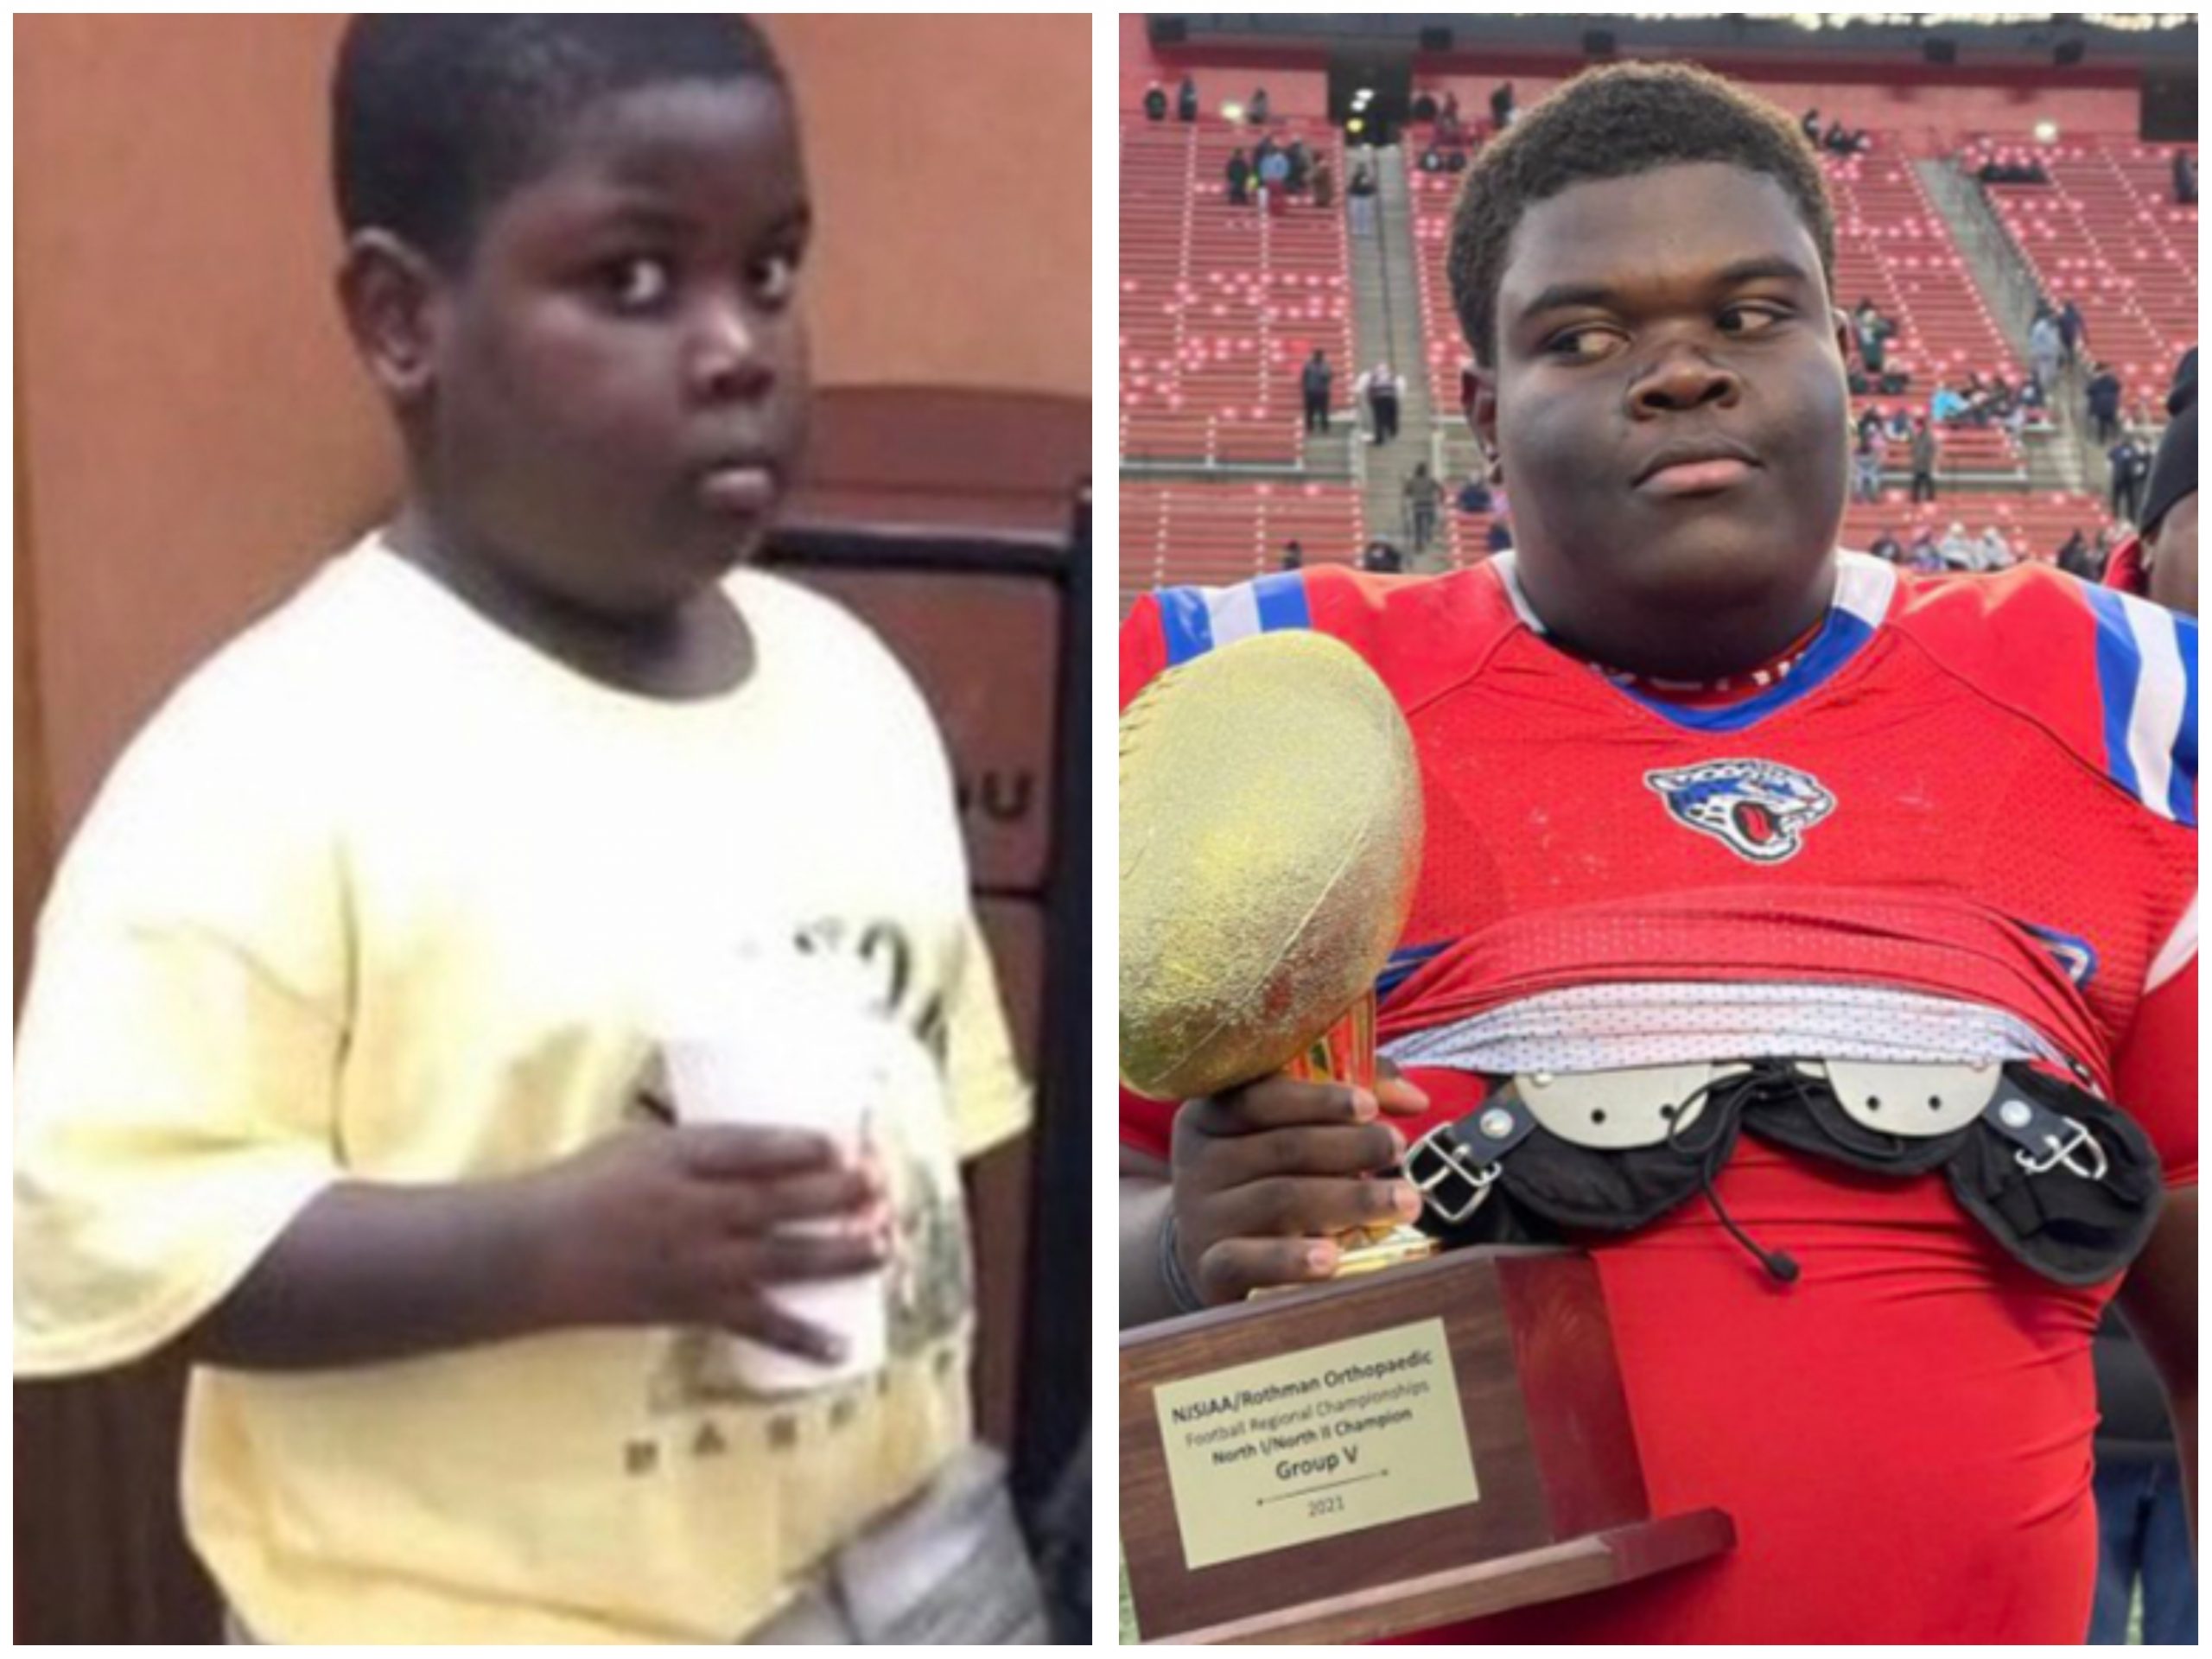 ‘Popeyes Meme Kid’ Now College Football Player Signs NIL Deal With the Chicken Chain